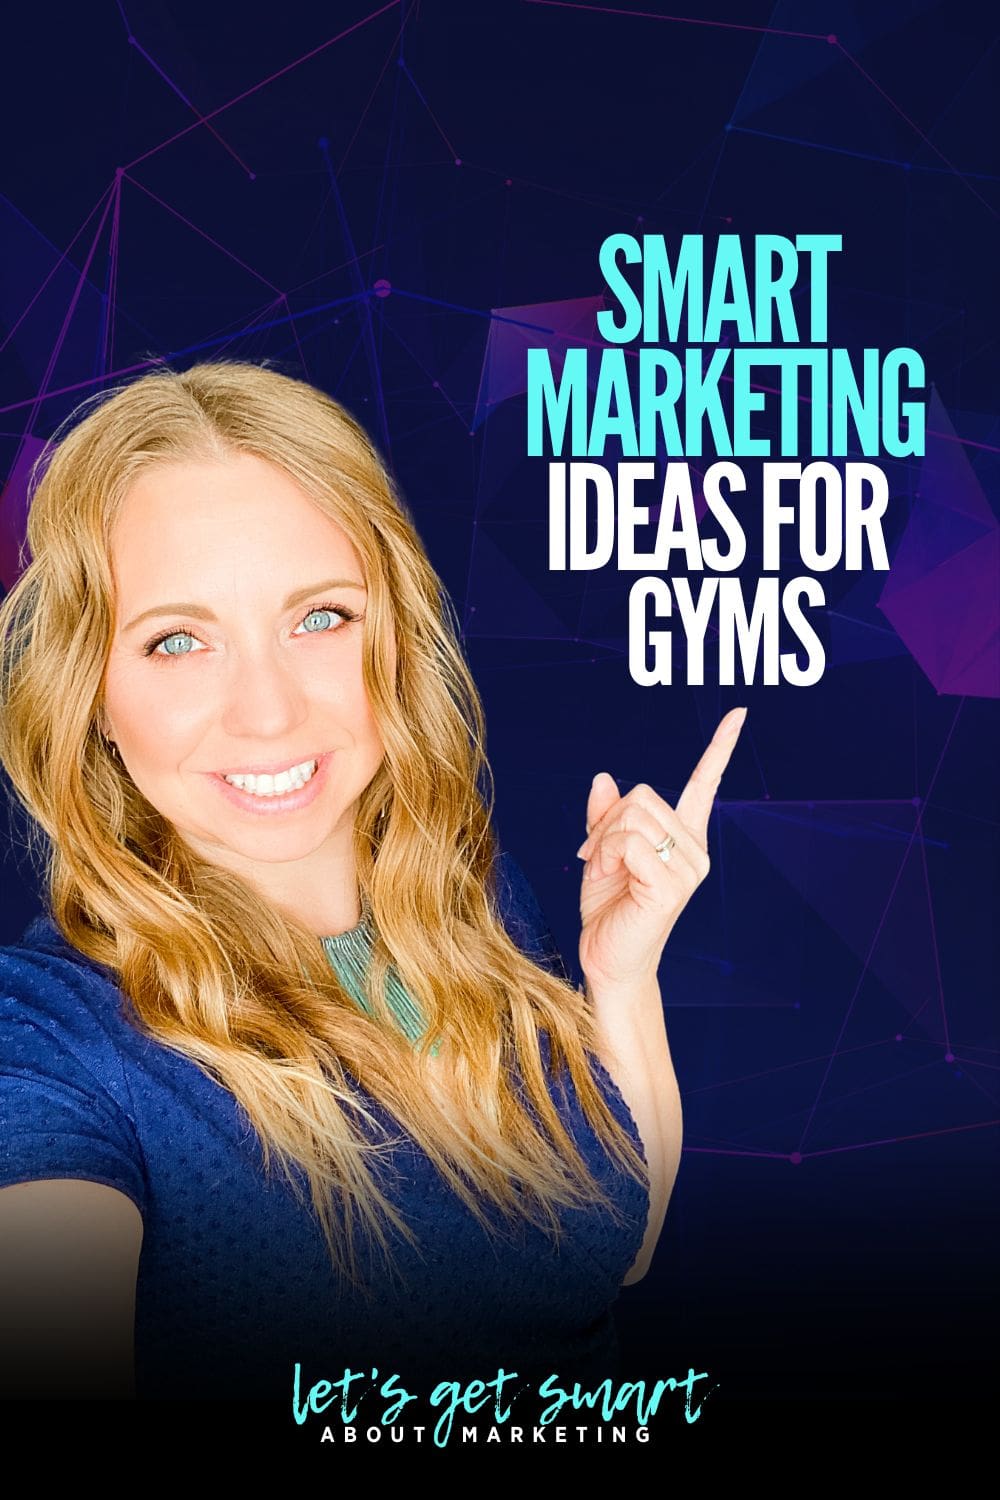 Smart Marketing ideas for gyms